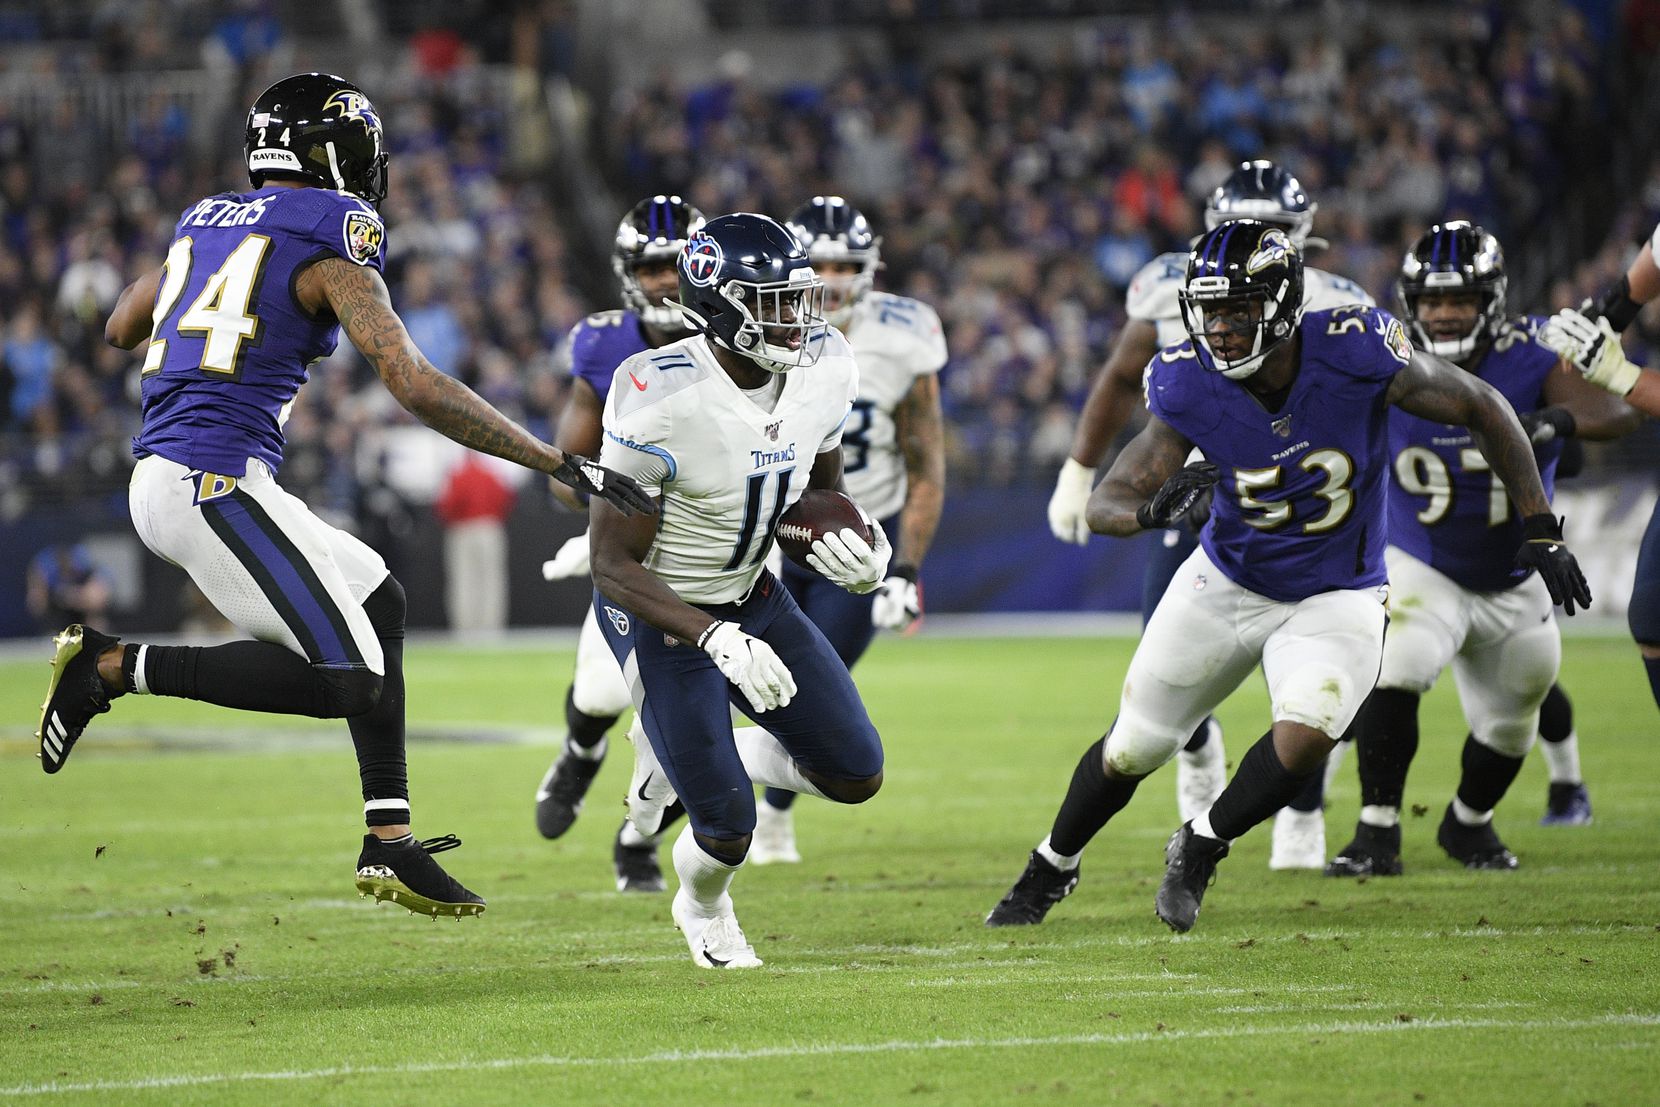 FILE - Titans wide receiver A.J. Brown (11) runs after the catch during the second half of a divisional playoff game against the Ravens on Saturday, Jan. 11, 2020, in Baltimore. (AP Photo/Nick Wass)